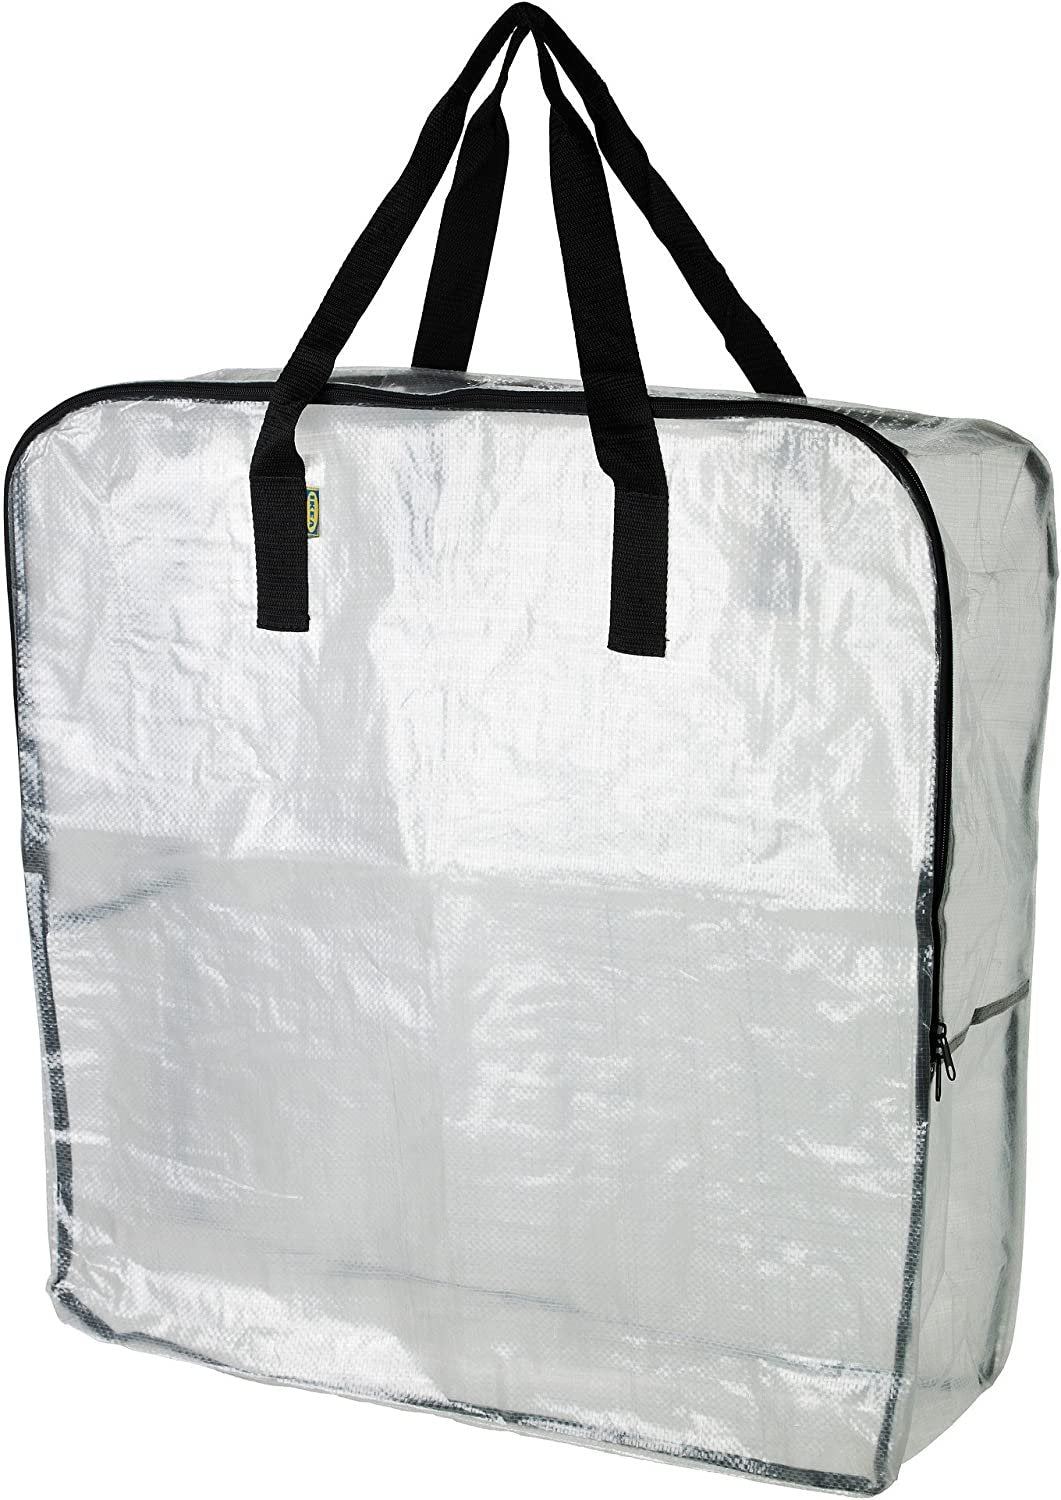 IKEA Extra Large Clear Storage Bag for Clothing Storage, Under the Bed Storage, Garage Storage, Recycling Bags (1)